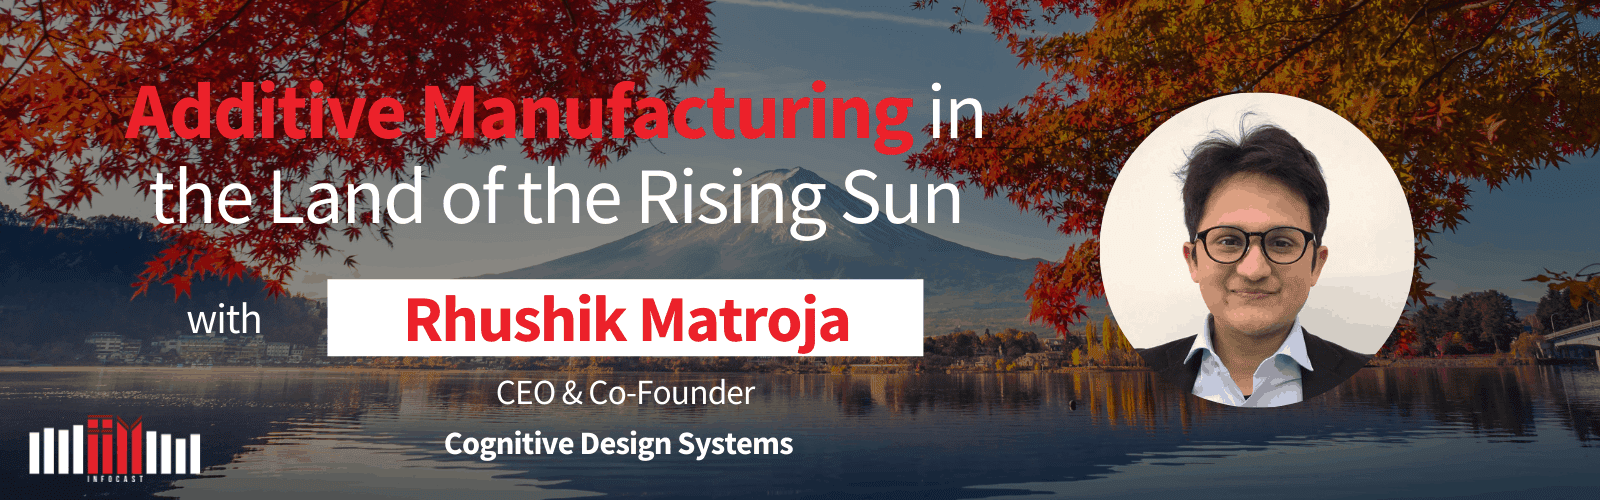 Additive Manufacturing in the Land of the Rising Sun with Rhushik Matroja